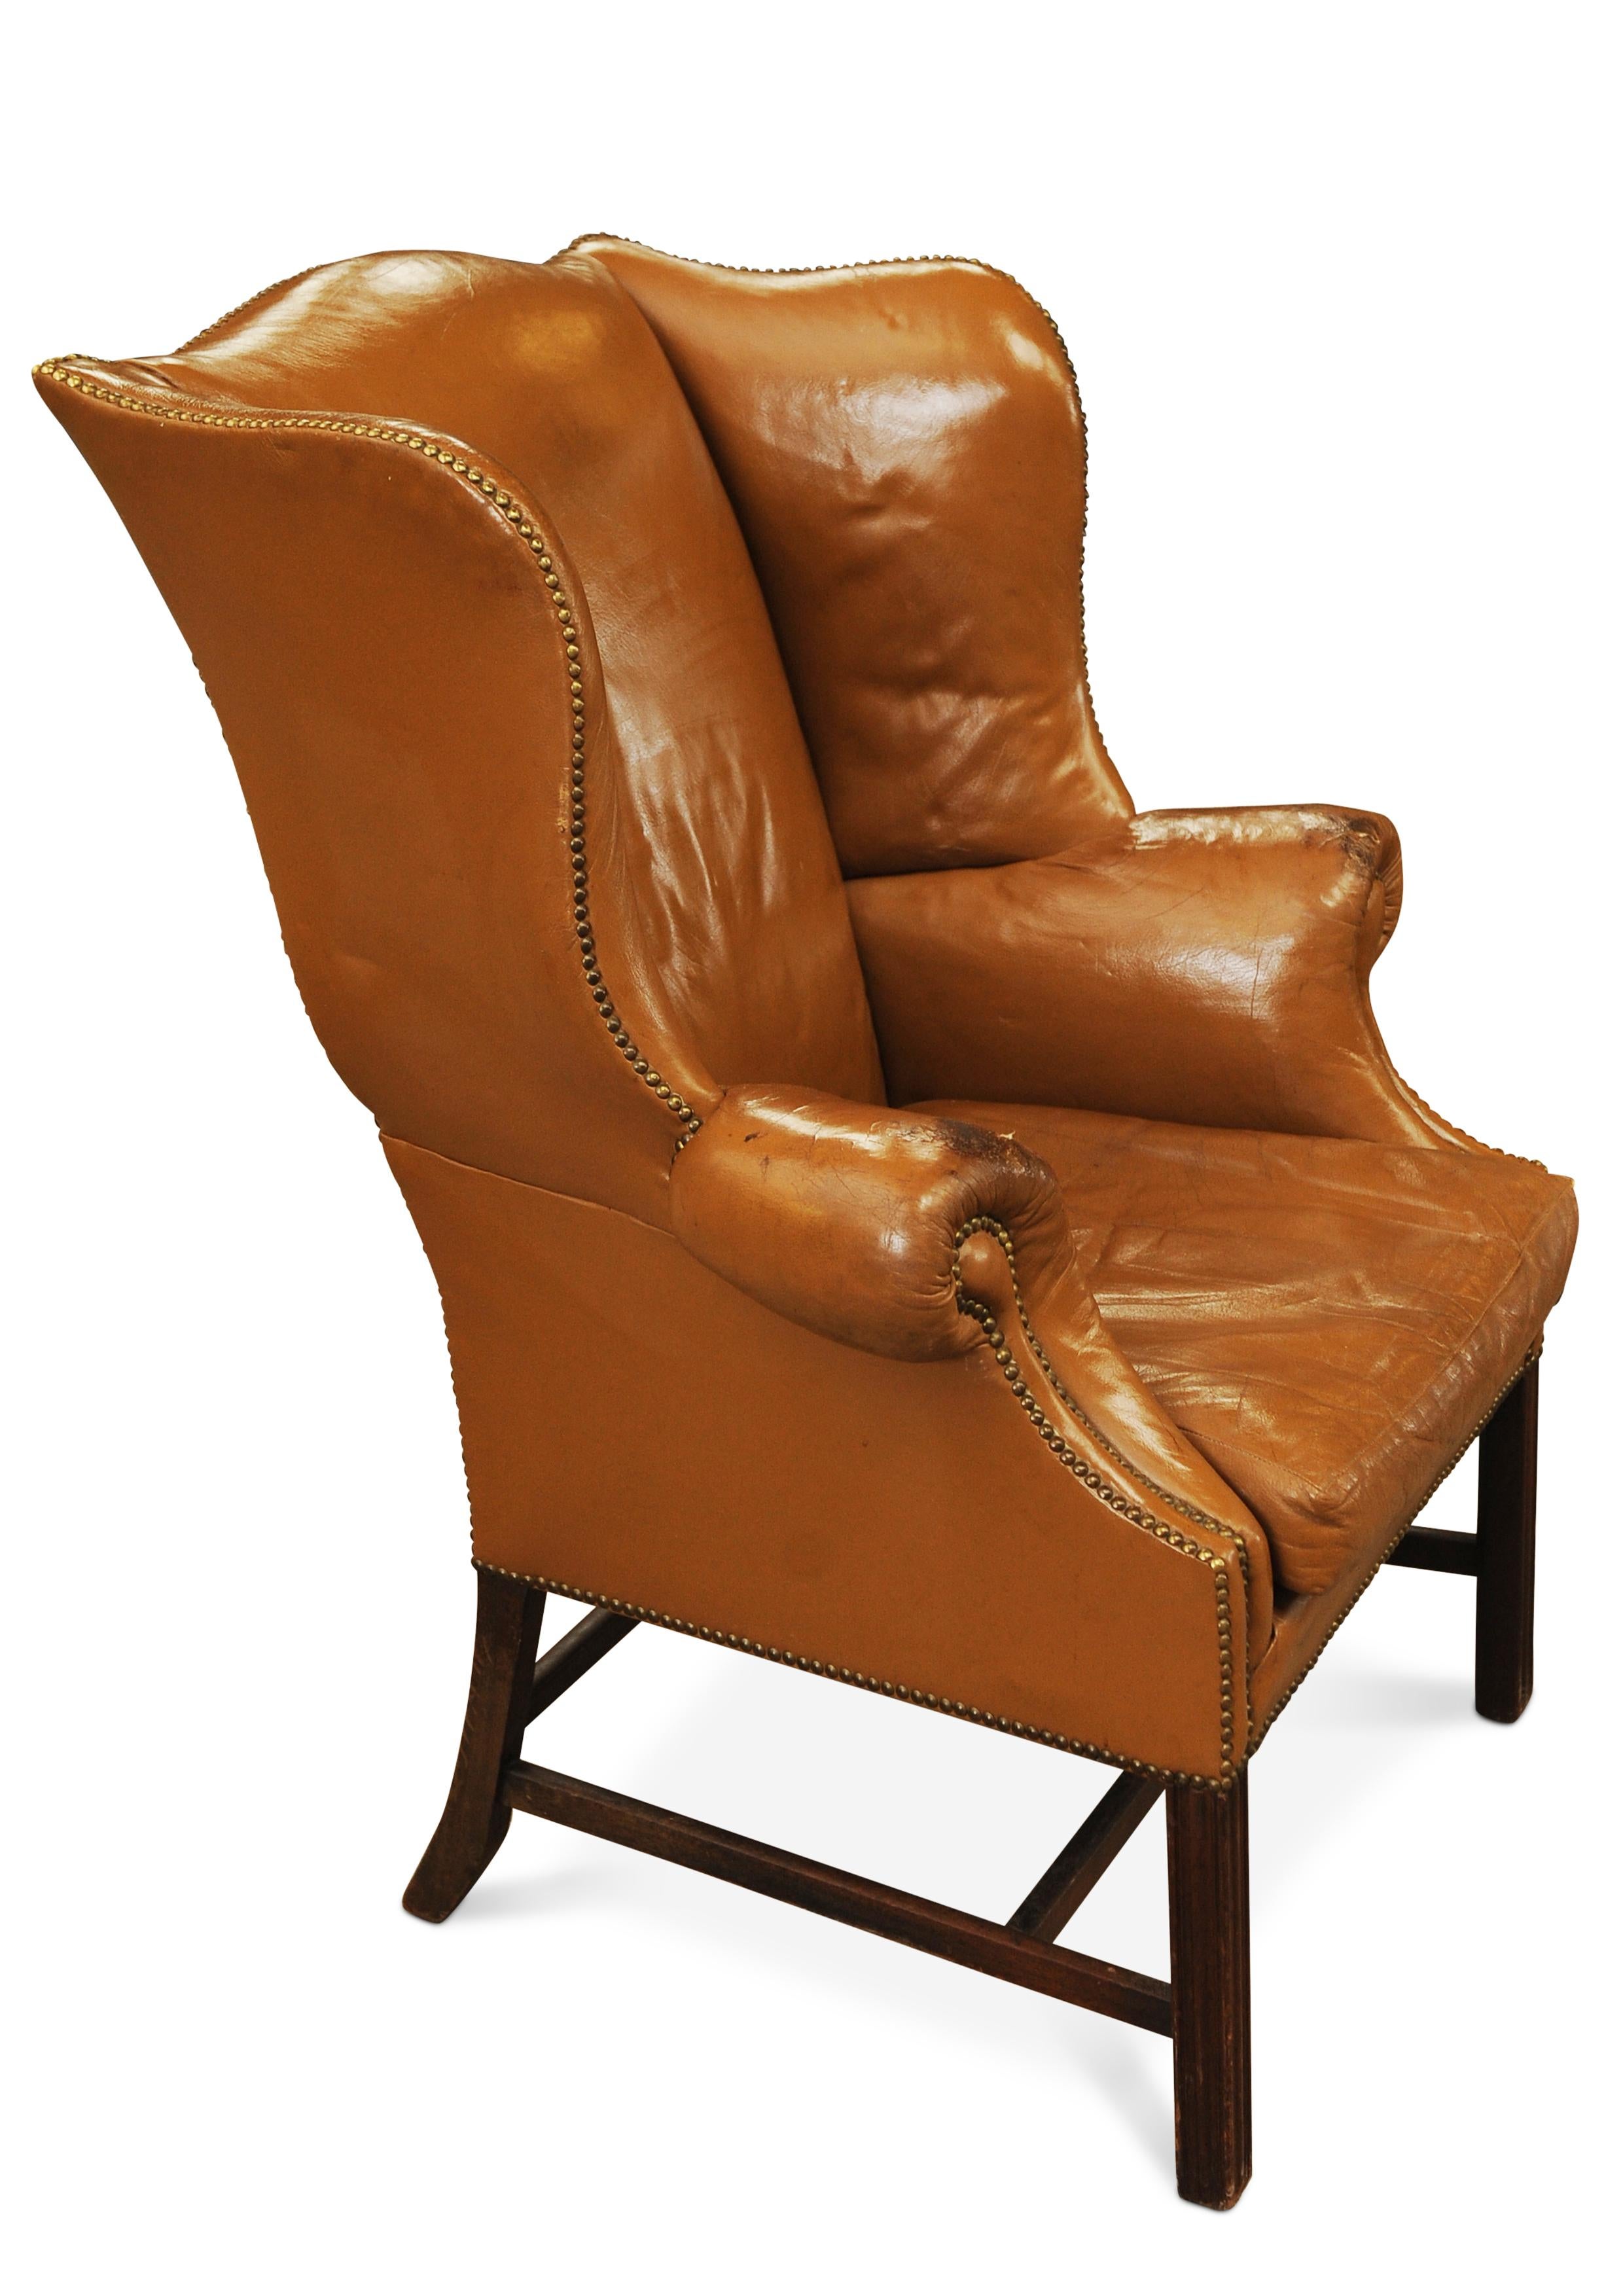 Late 19th Century Georgian Mahogany And Tan Leather Wing Back Armchair With Brass Studded Border.

Featuring a shaped back with out-scrolled arms raised over squared fluted front legs, shaped back legs joined with H stretcher, upholstered in a tan